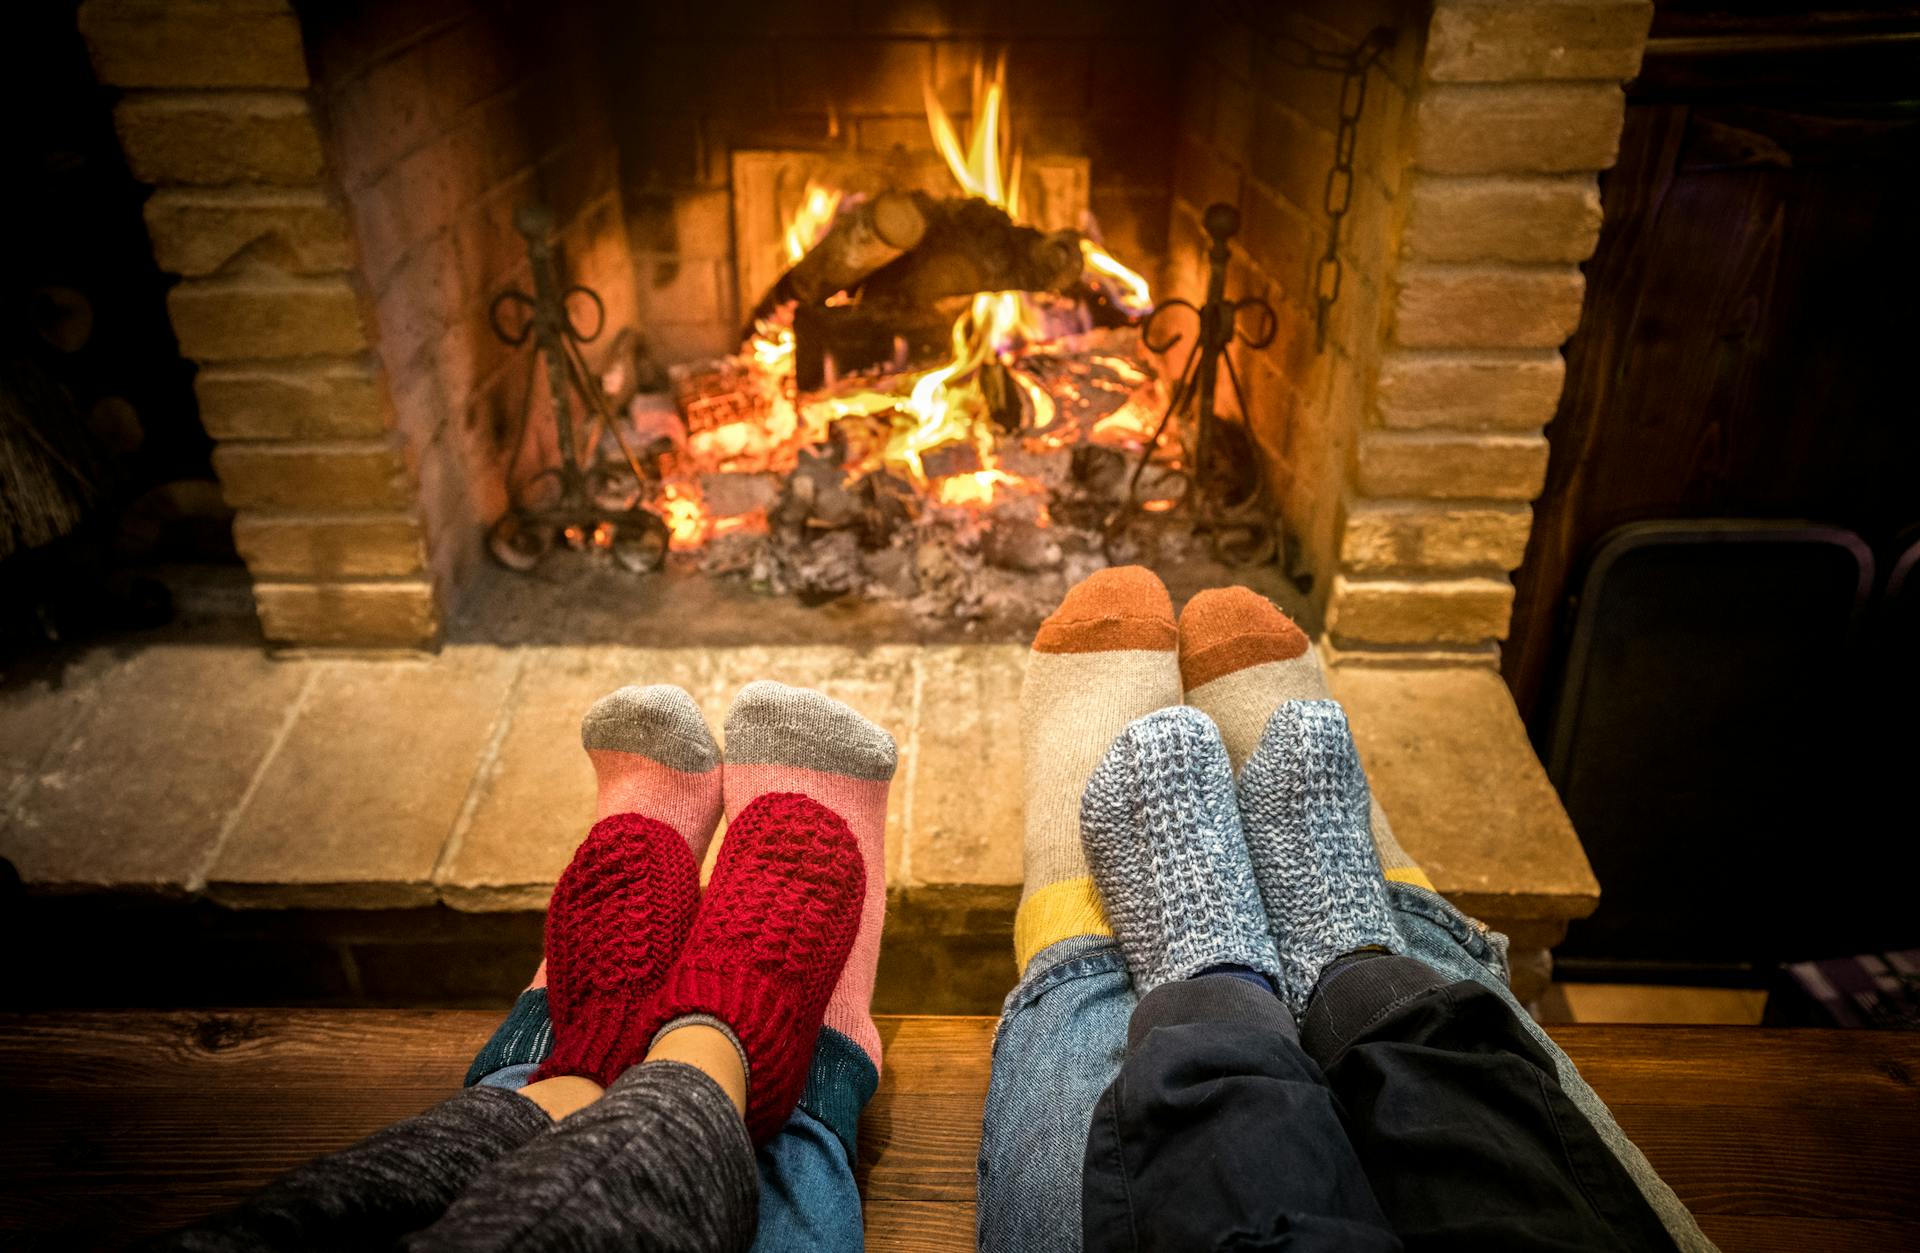 Family relaxing in front of fireplace at ski resort